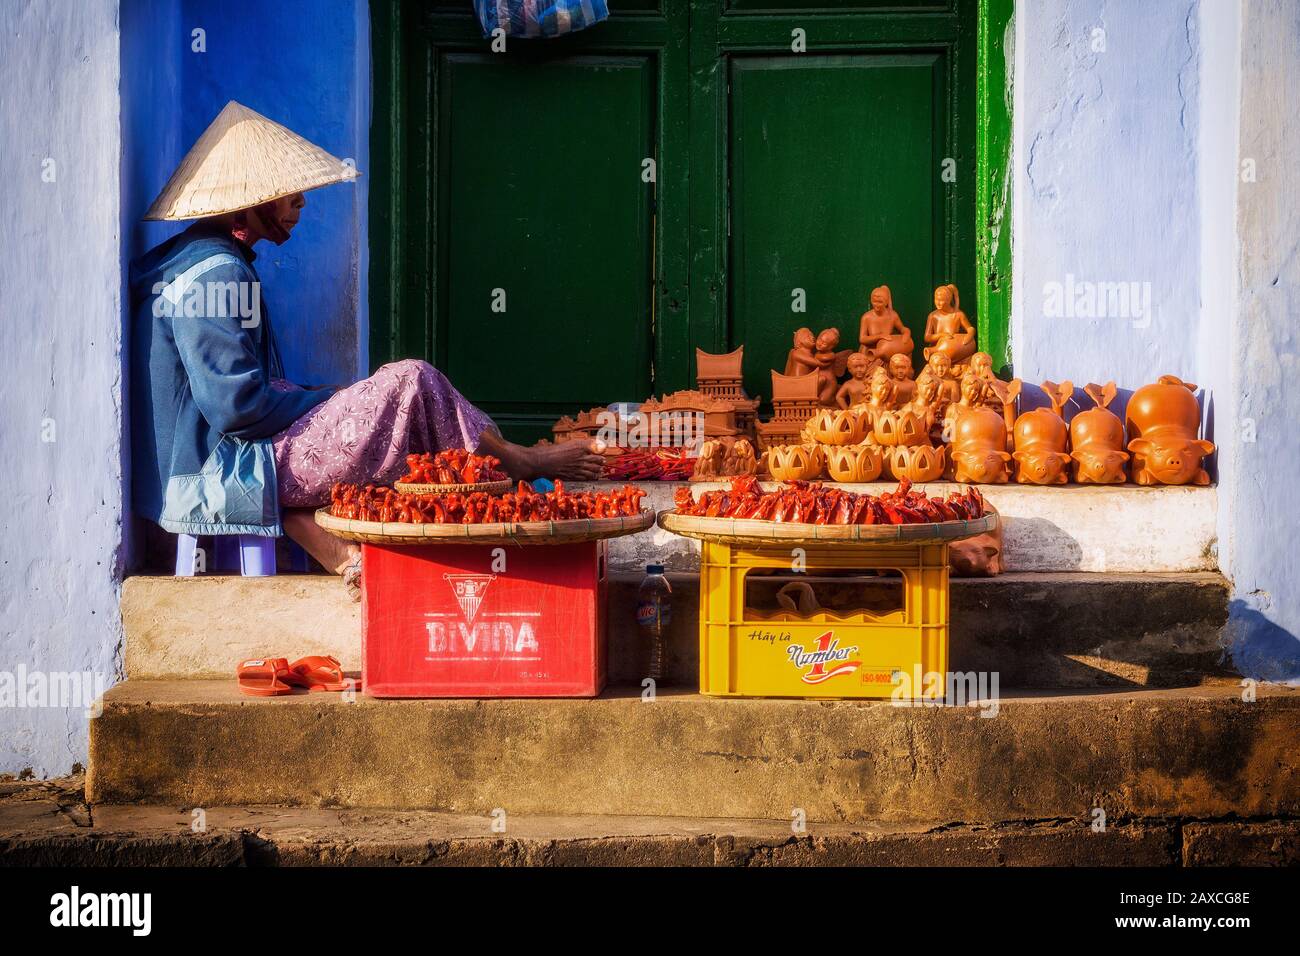 Vietnamese street vendor wearing traditional straw hat selling handicrafts on the street in Hoi An Ancient Town, Central Vietnam. Stock Photo